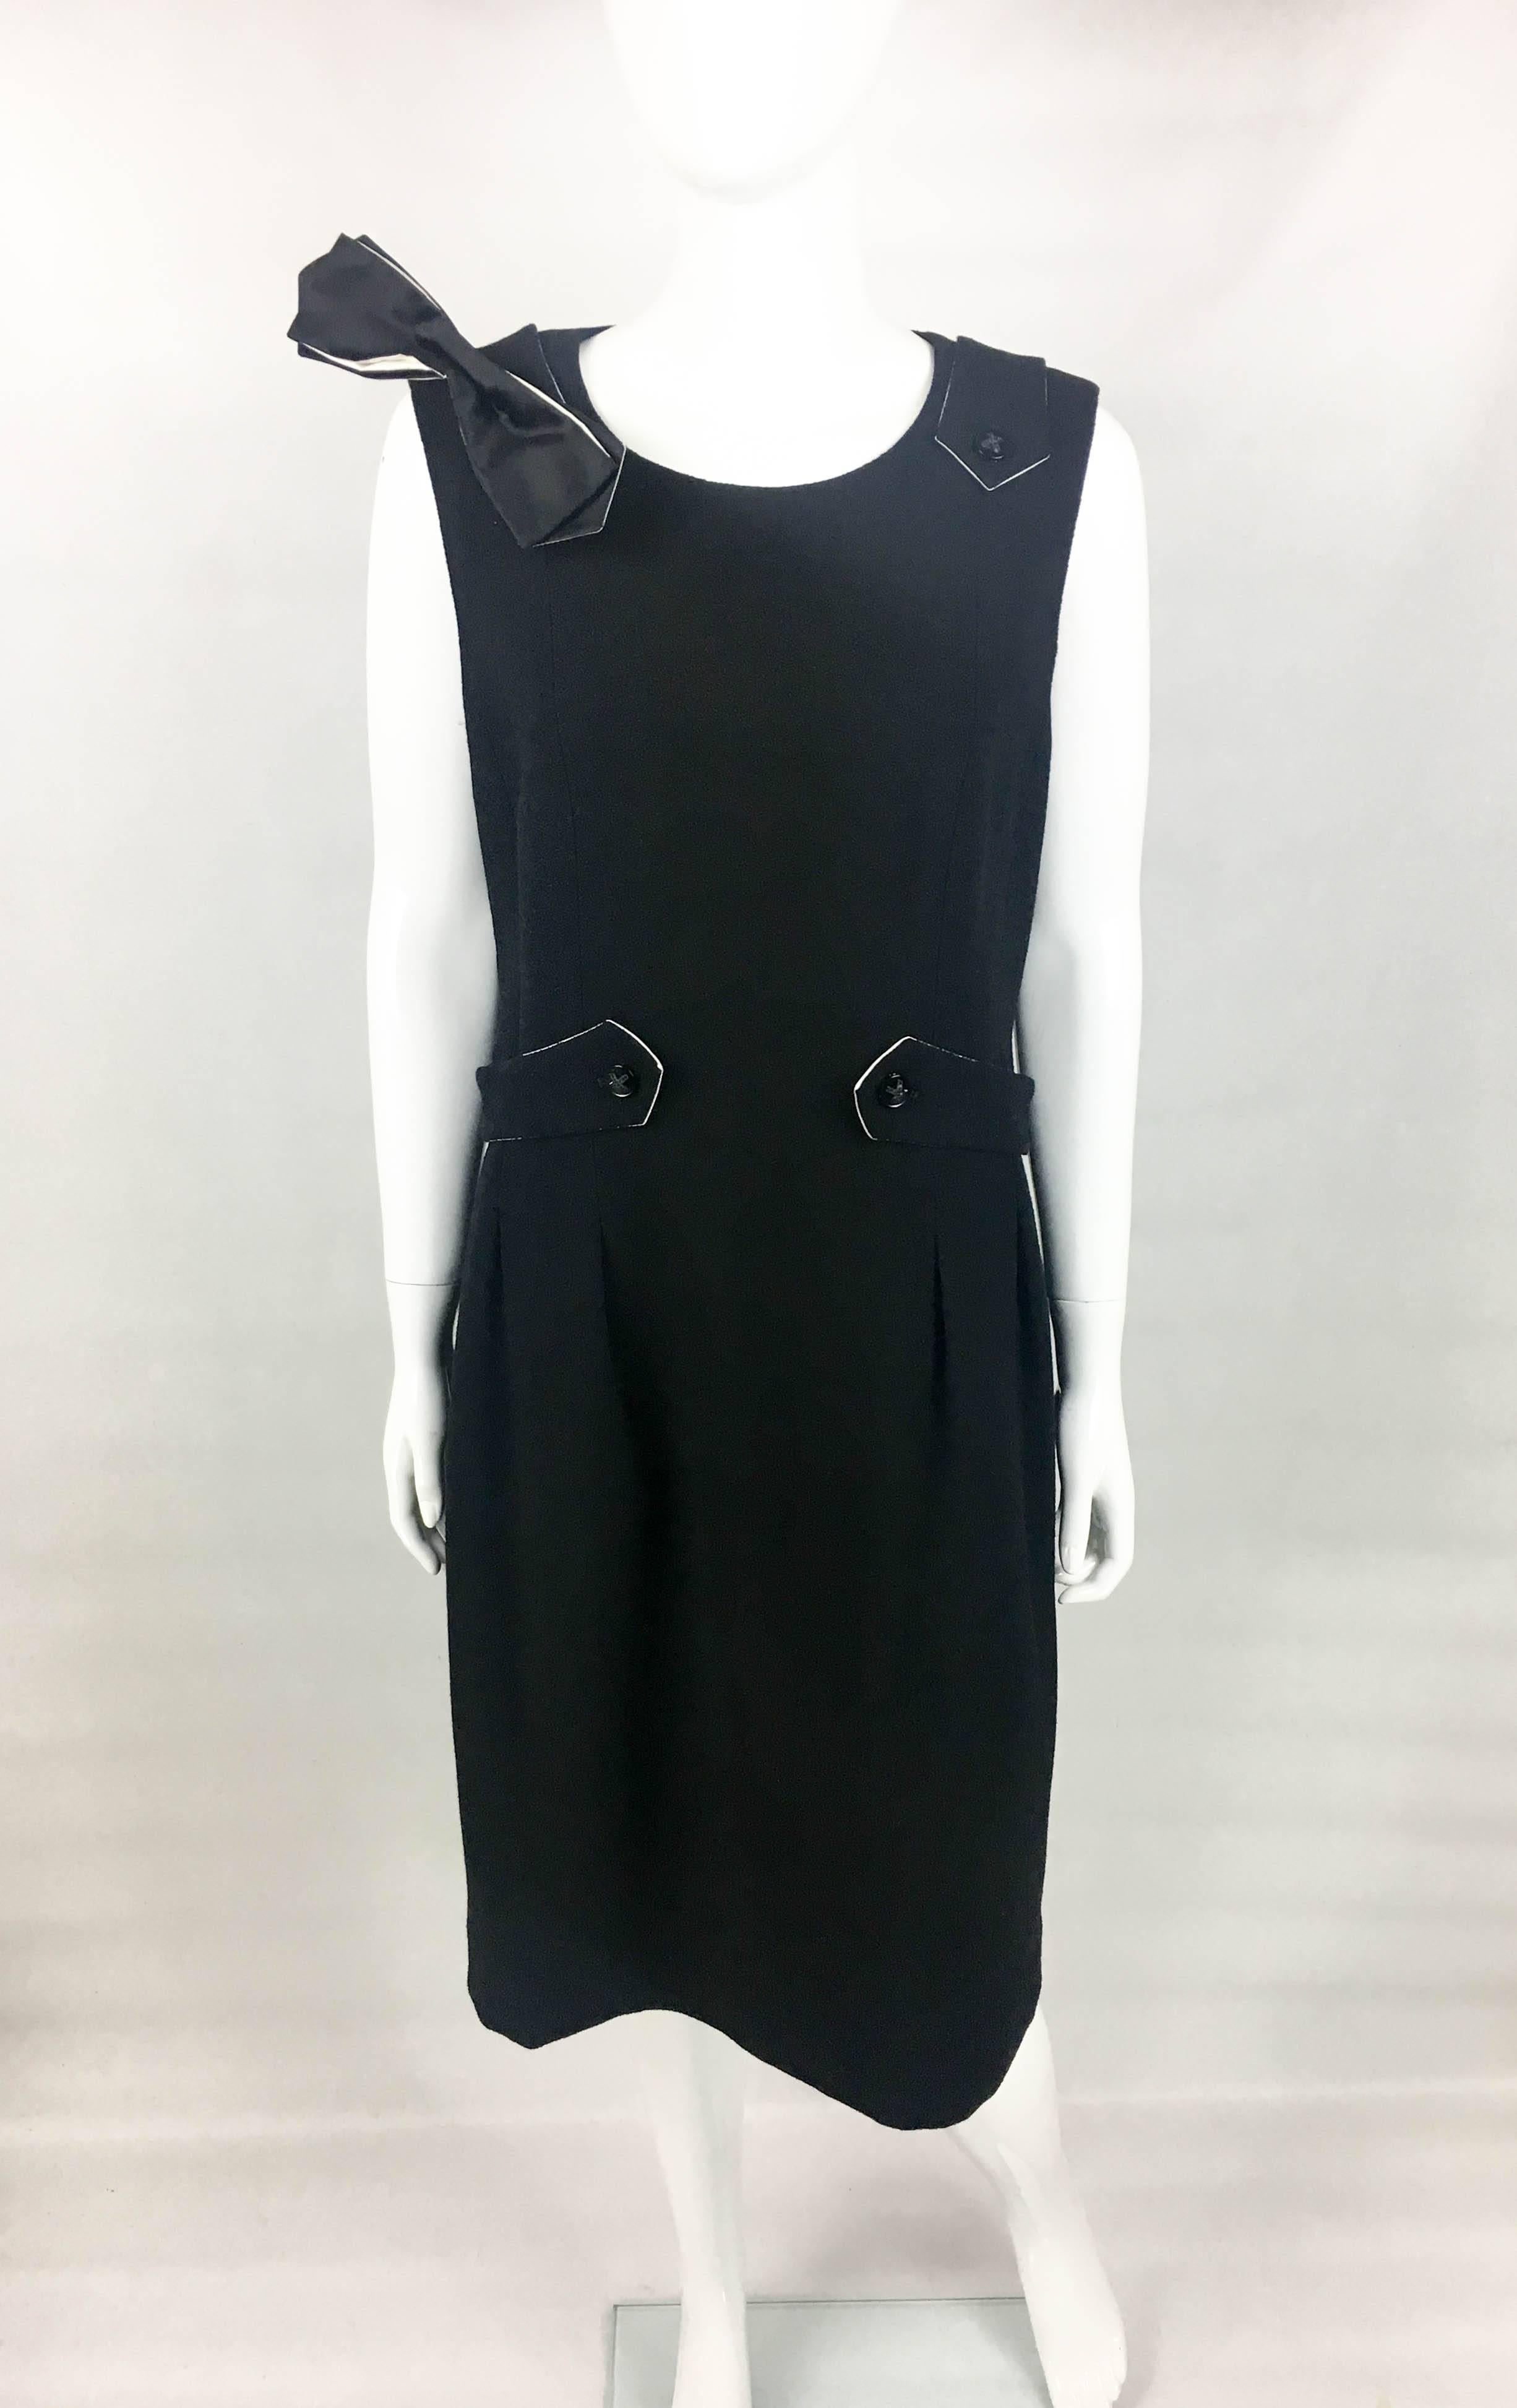 Chanel Runway Look Black Dress With Removable Bow. This elegant sleeveless dress by Chanel was created for the 2006 Autumn / Winter Collection. An identical dress can be seen worn by Daria Werbowy on the runway (please refer to photos). Made in